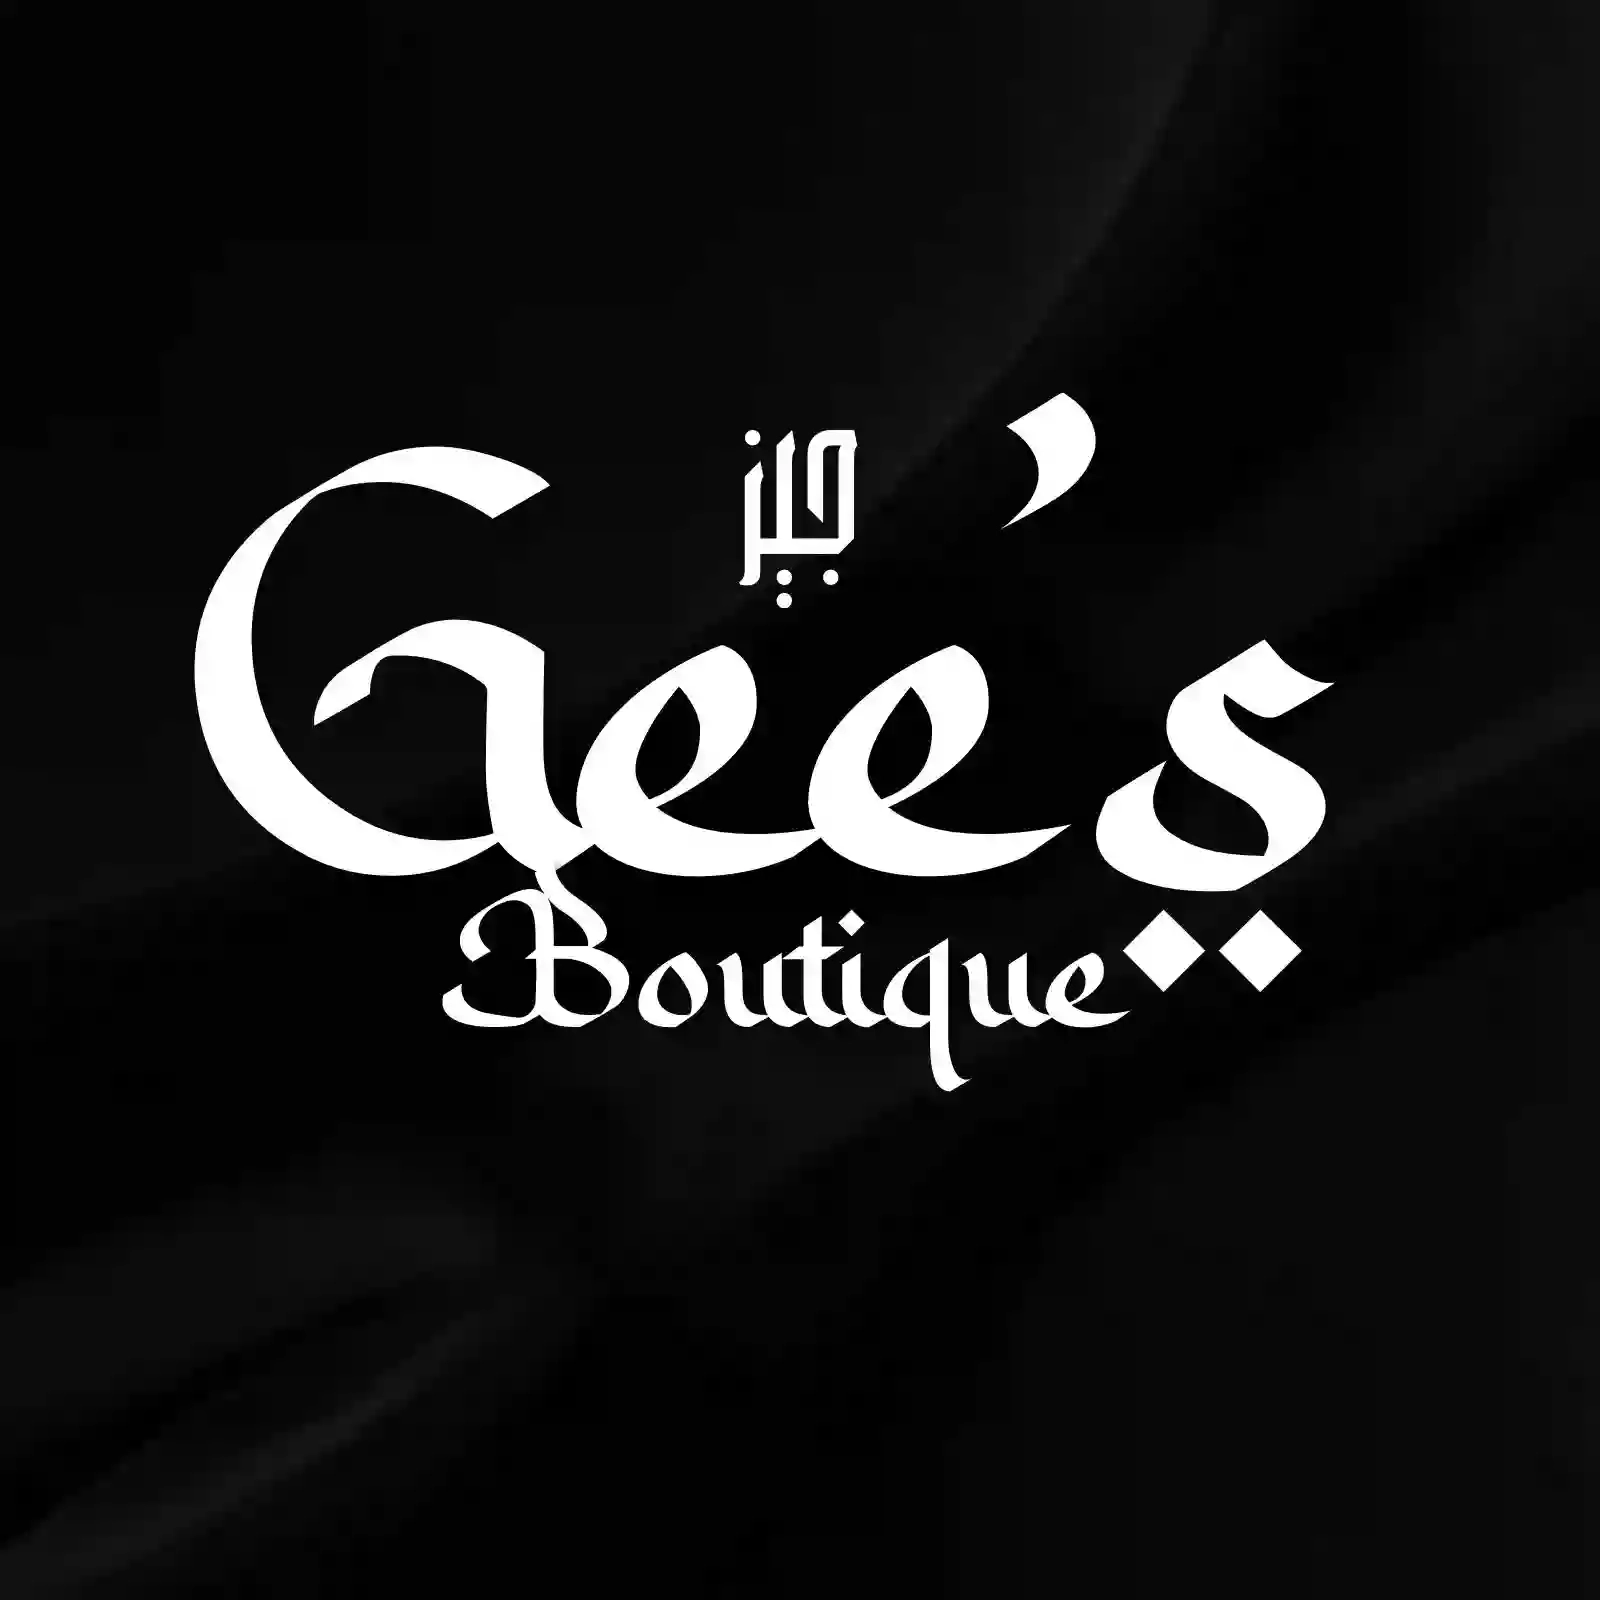 Gee’s Boutique